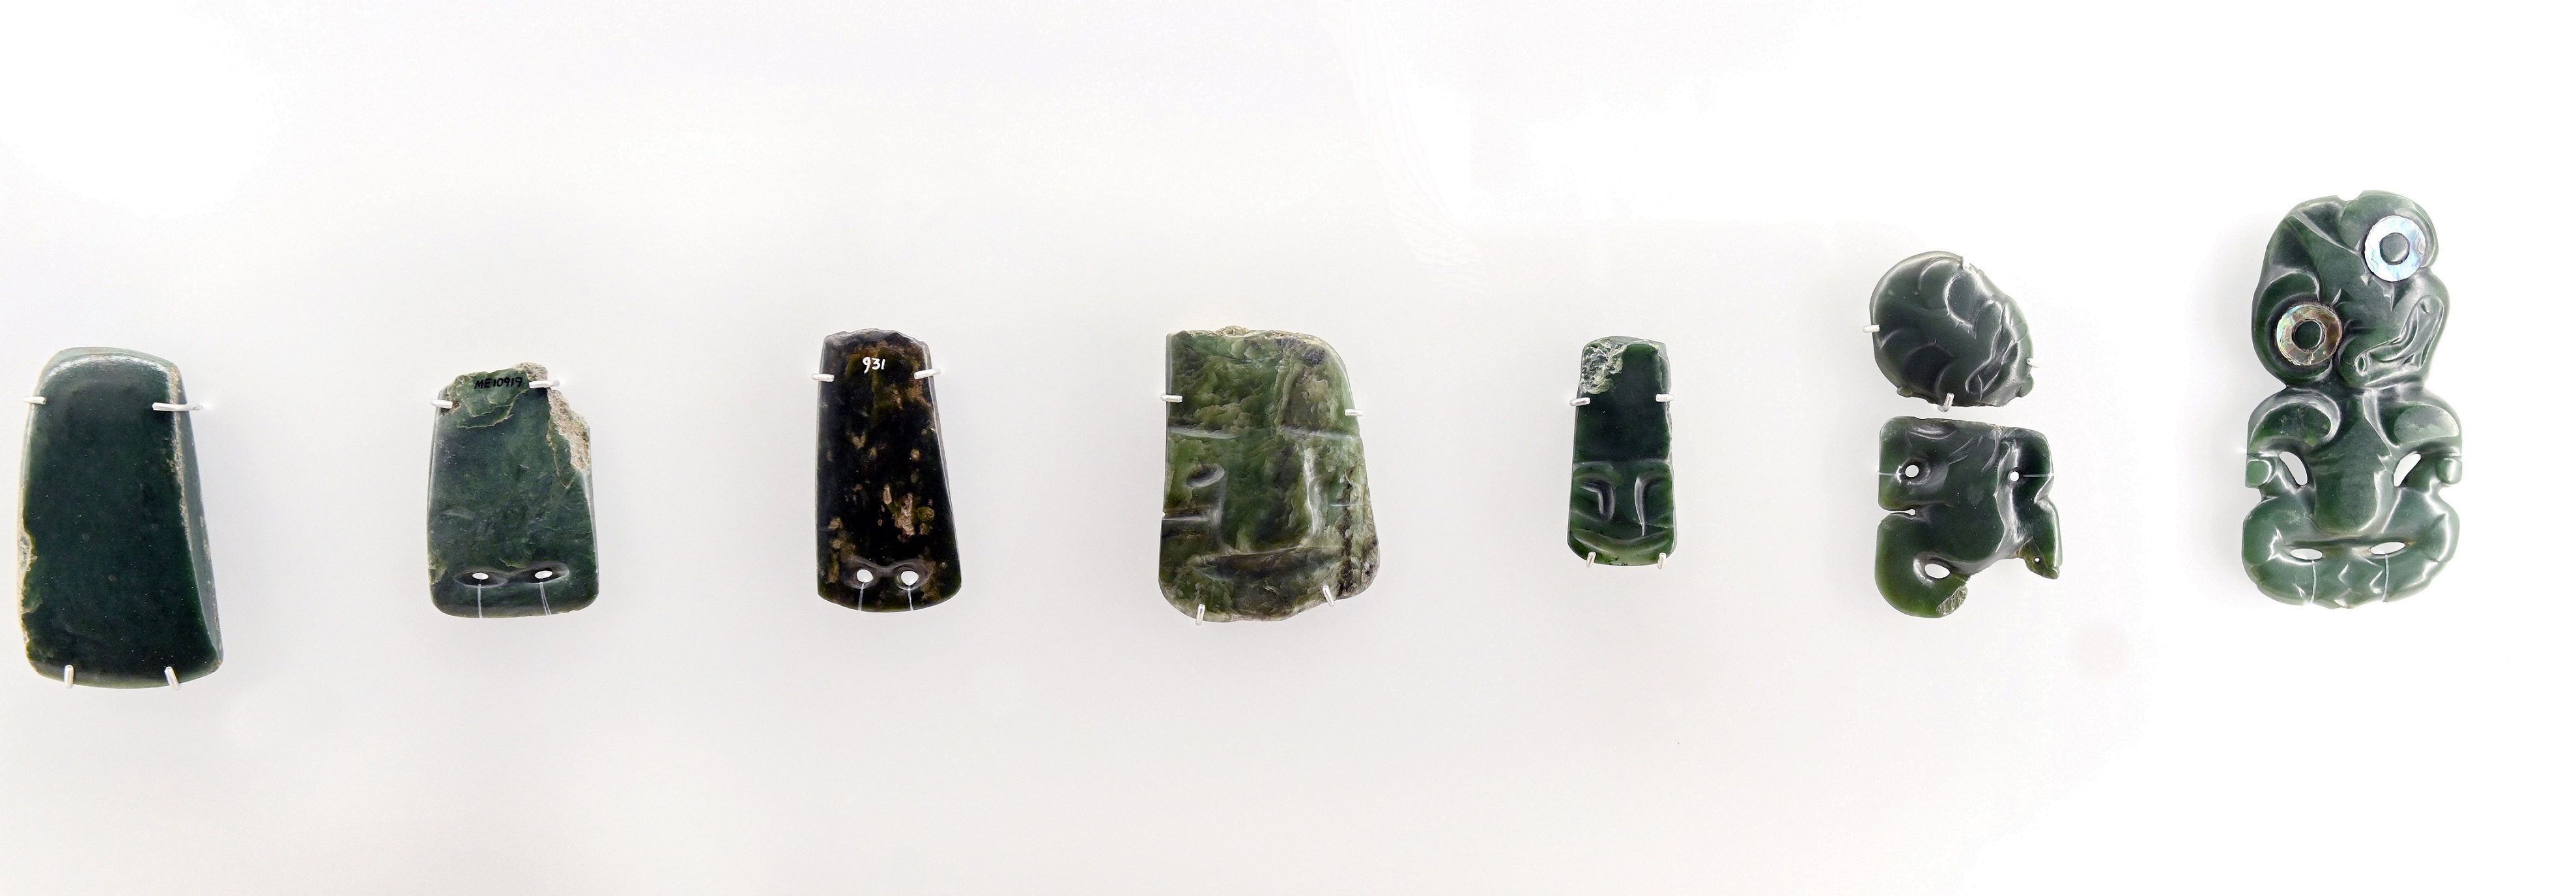 It was not unusual for pounamu tools to be later reshaped as adornments, as shown in this series...